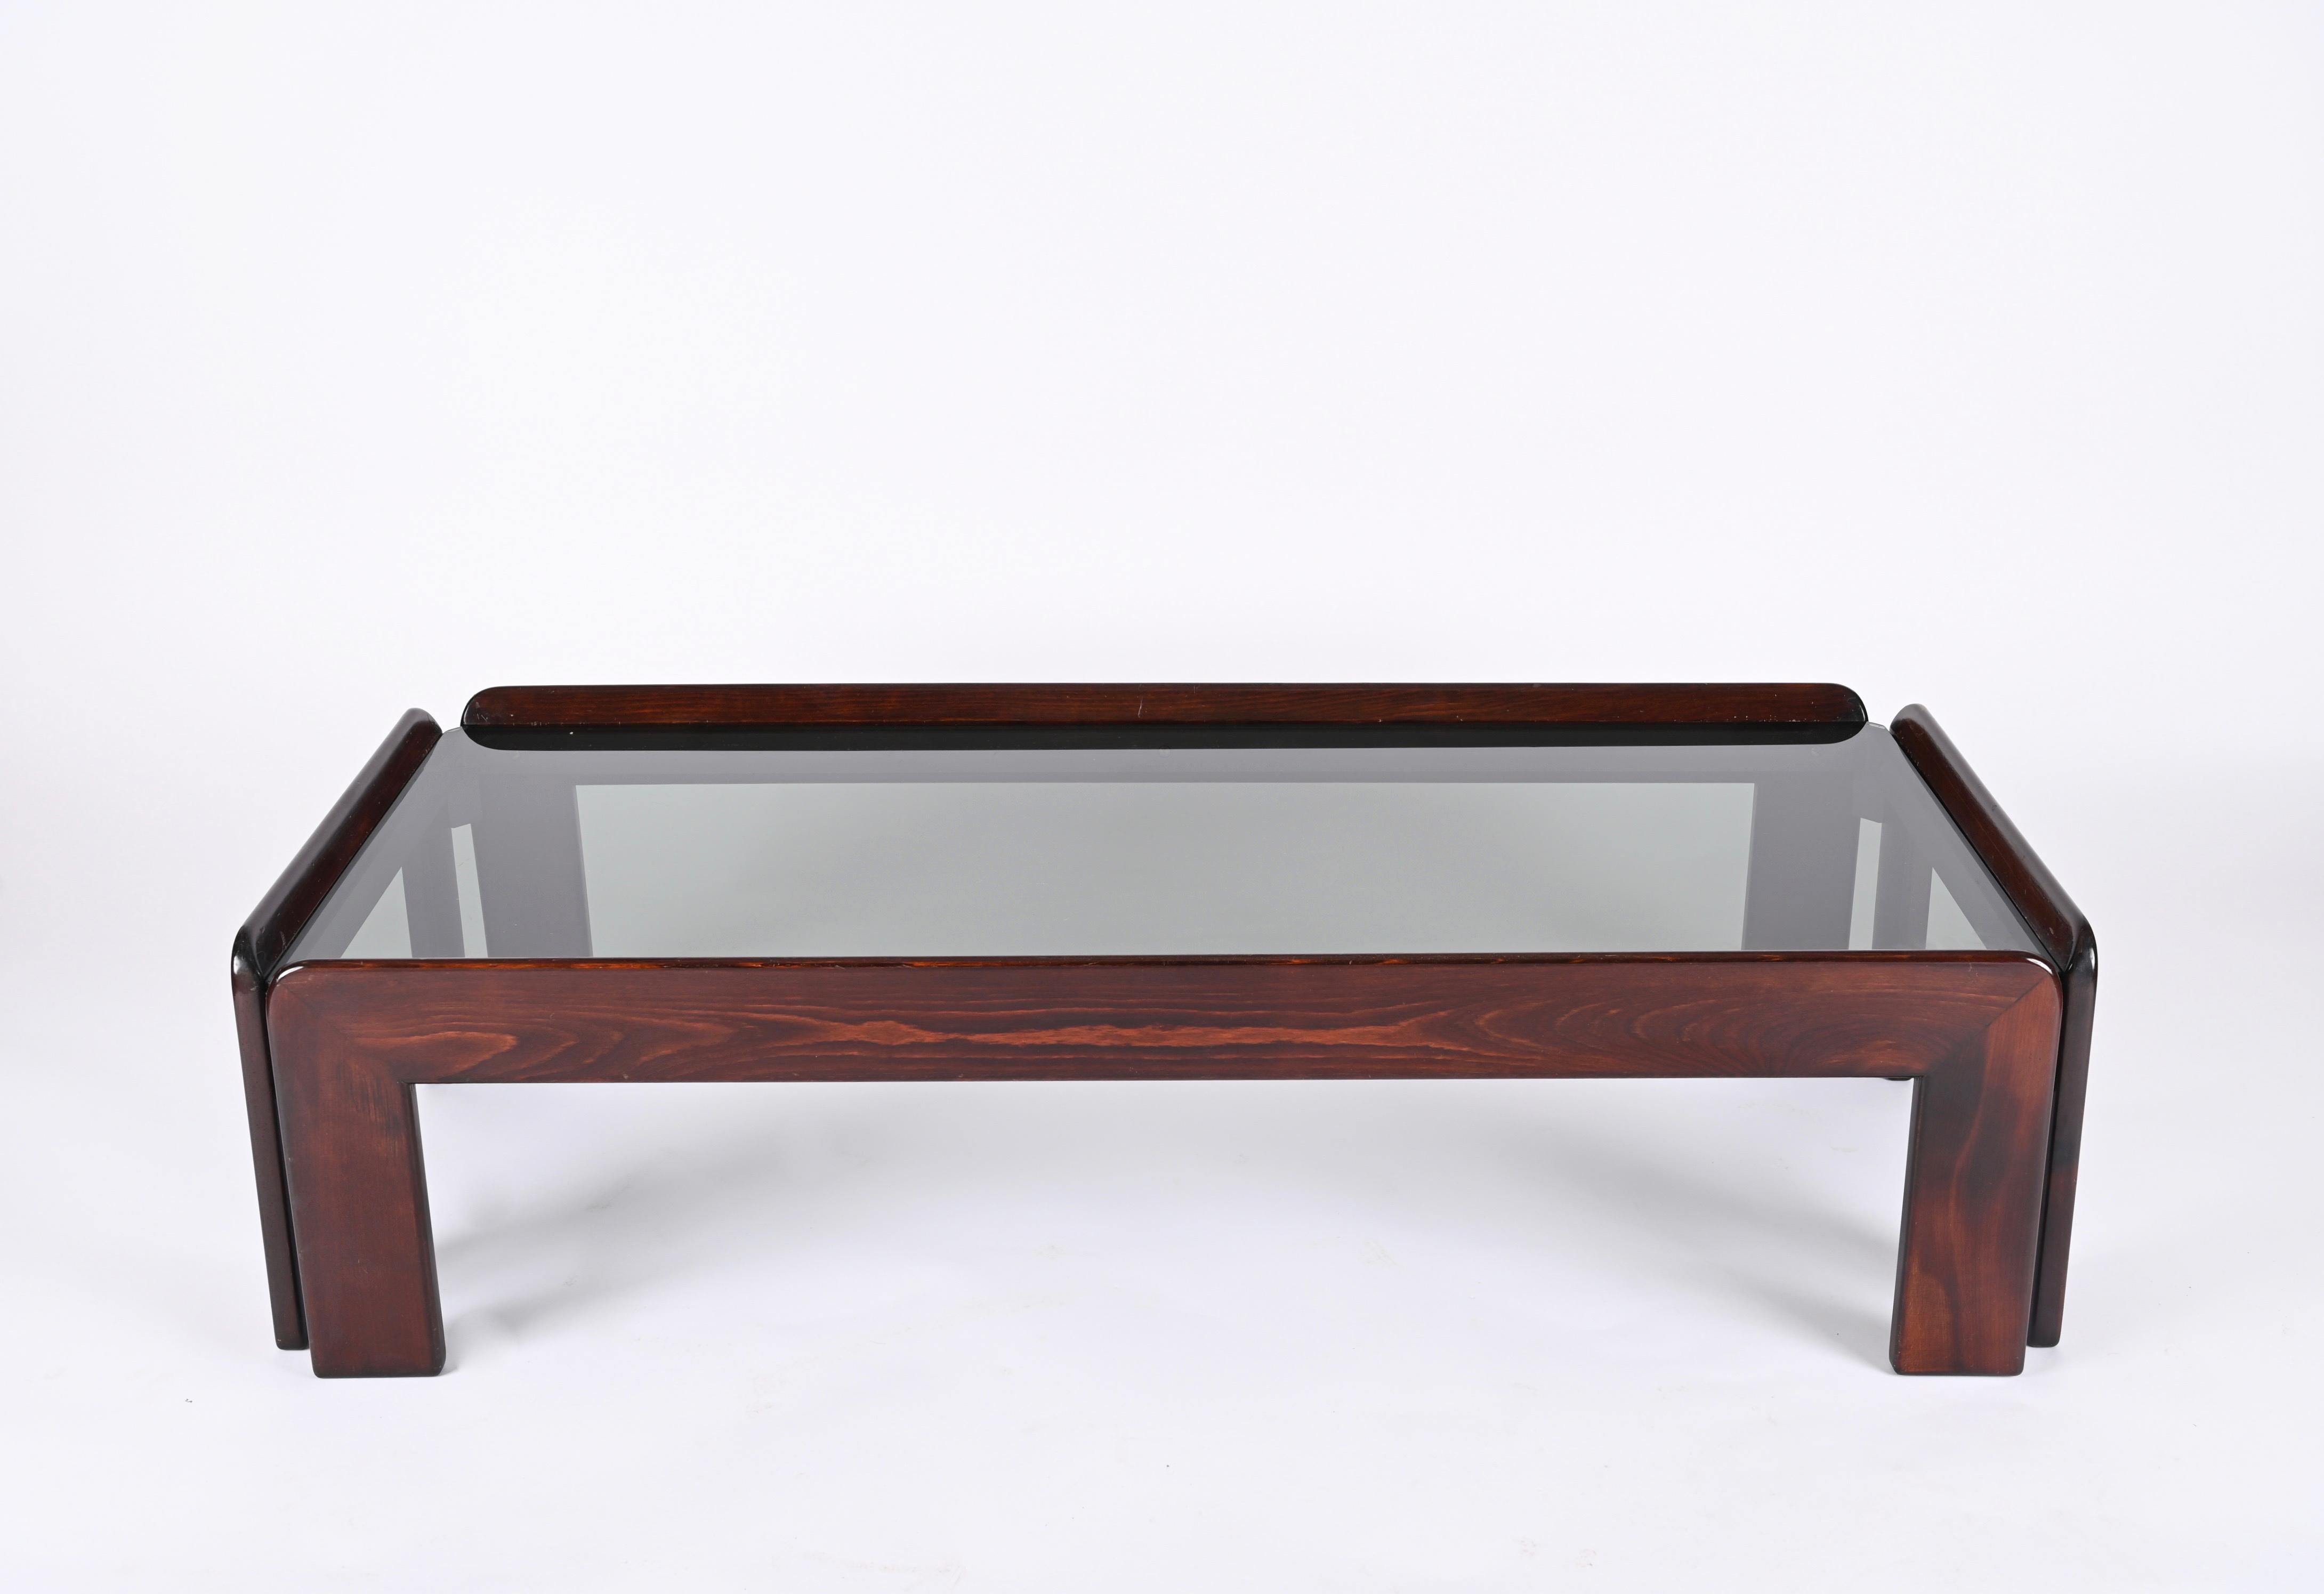 Stunning Midcentury rectangular solid wood coffee table with smoked glass top. It was produced in Italy in the 1960s by Cassina and designed by Afra & Tobia Scarpa. The wood structure is reinforced internally by a rectangular black metal frame that